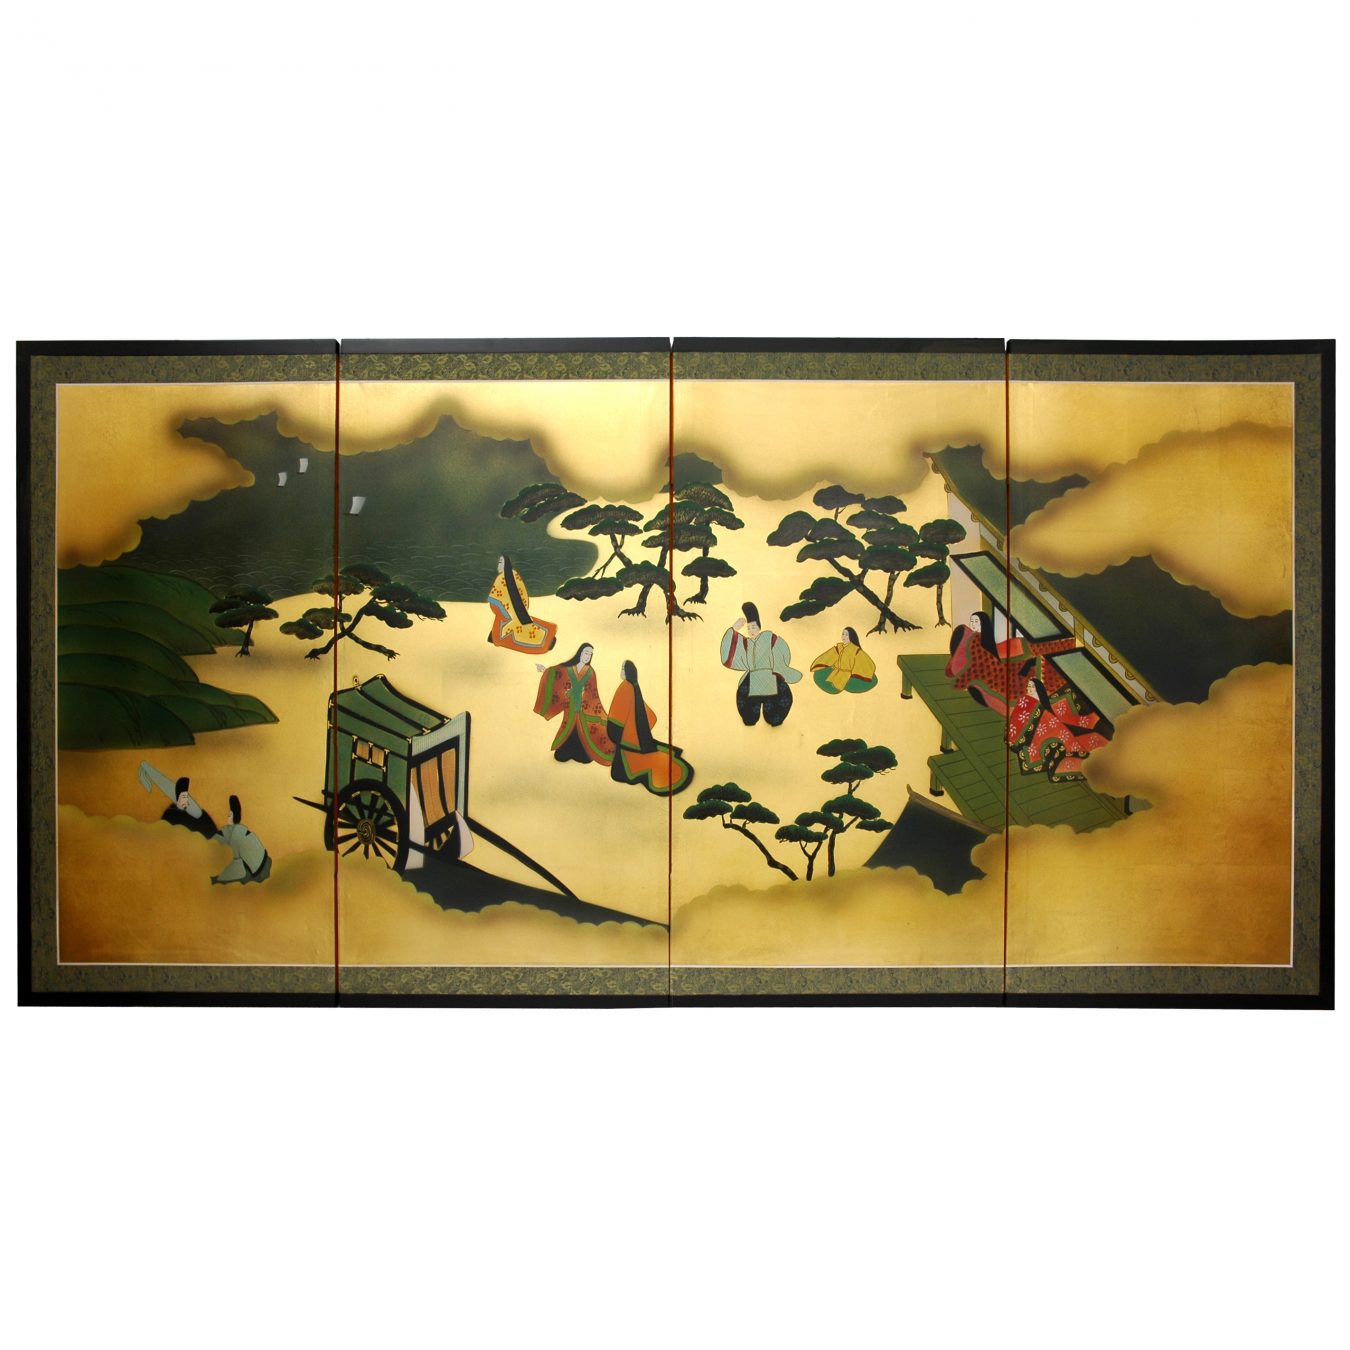 Gold Leaf 'From Heaven Above' Silk Painting (China) .